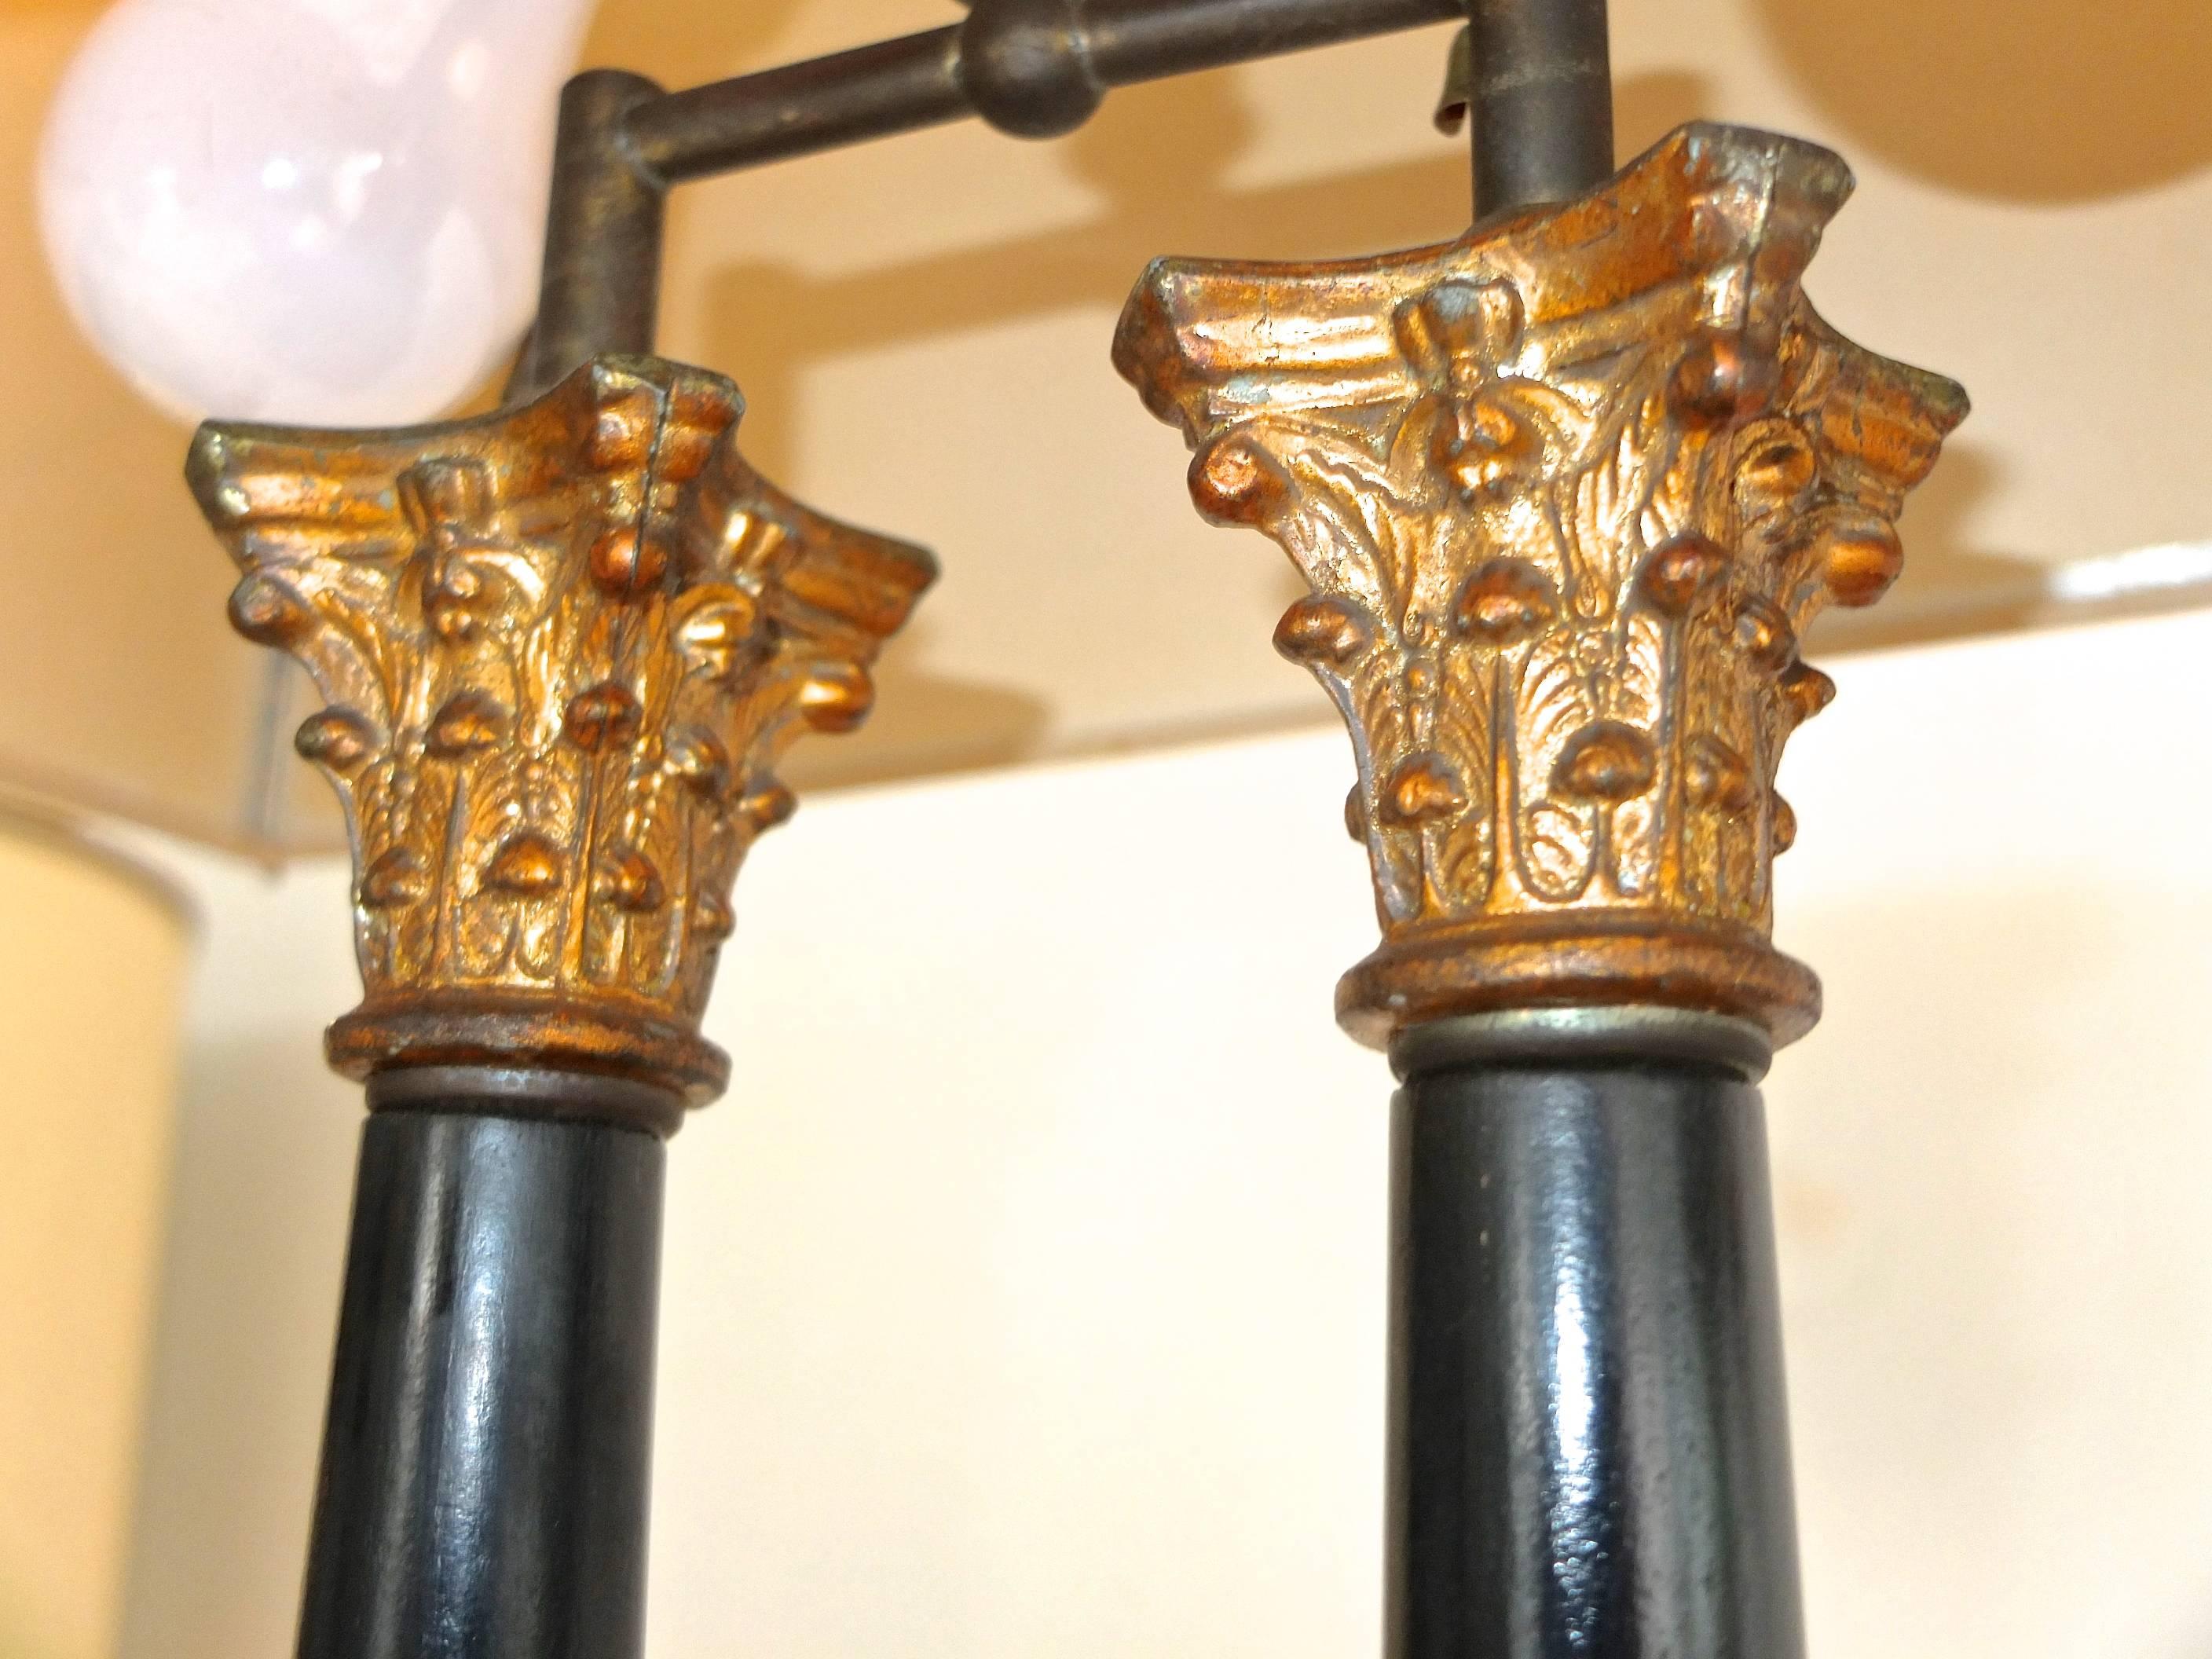 Pair of 1950s Camp Classical Double Column Lamps with Embellished Shades In Good Condition For Sale In Hanover, MA